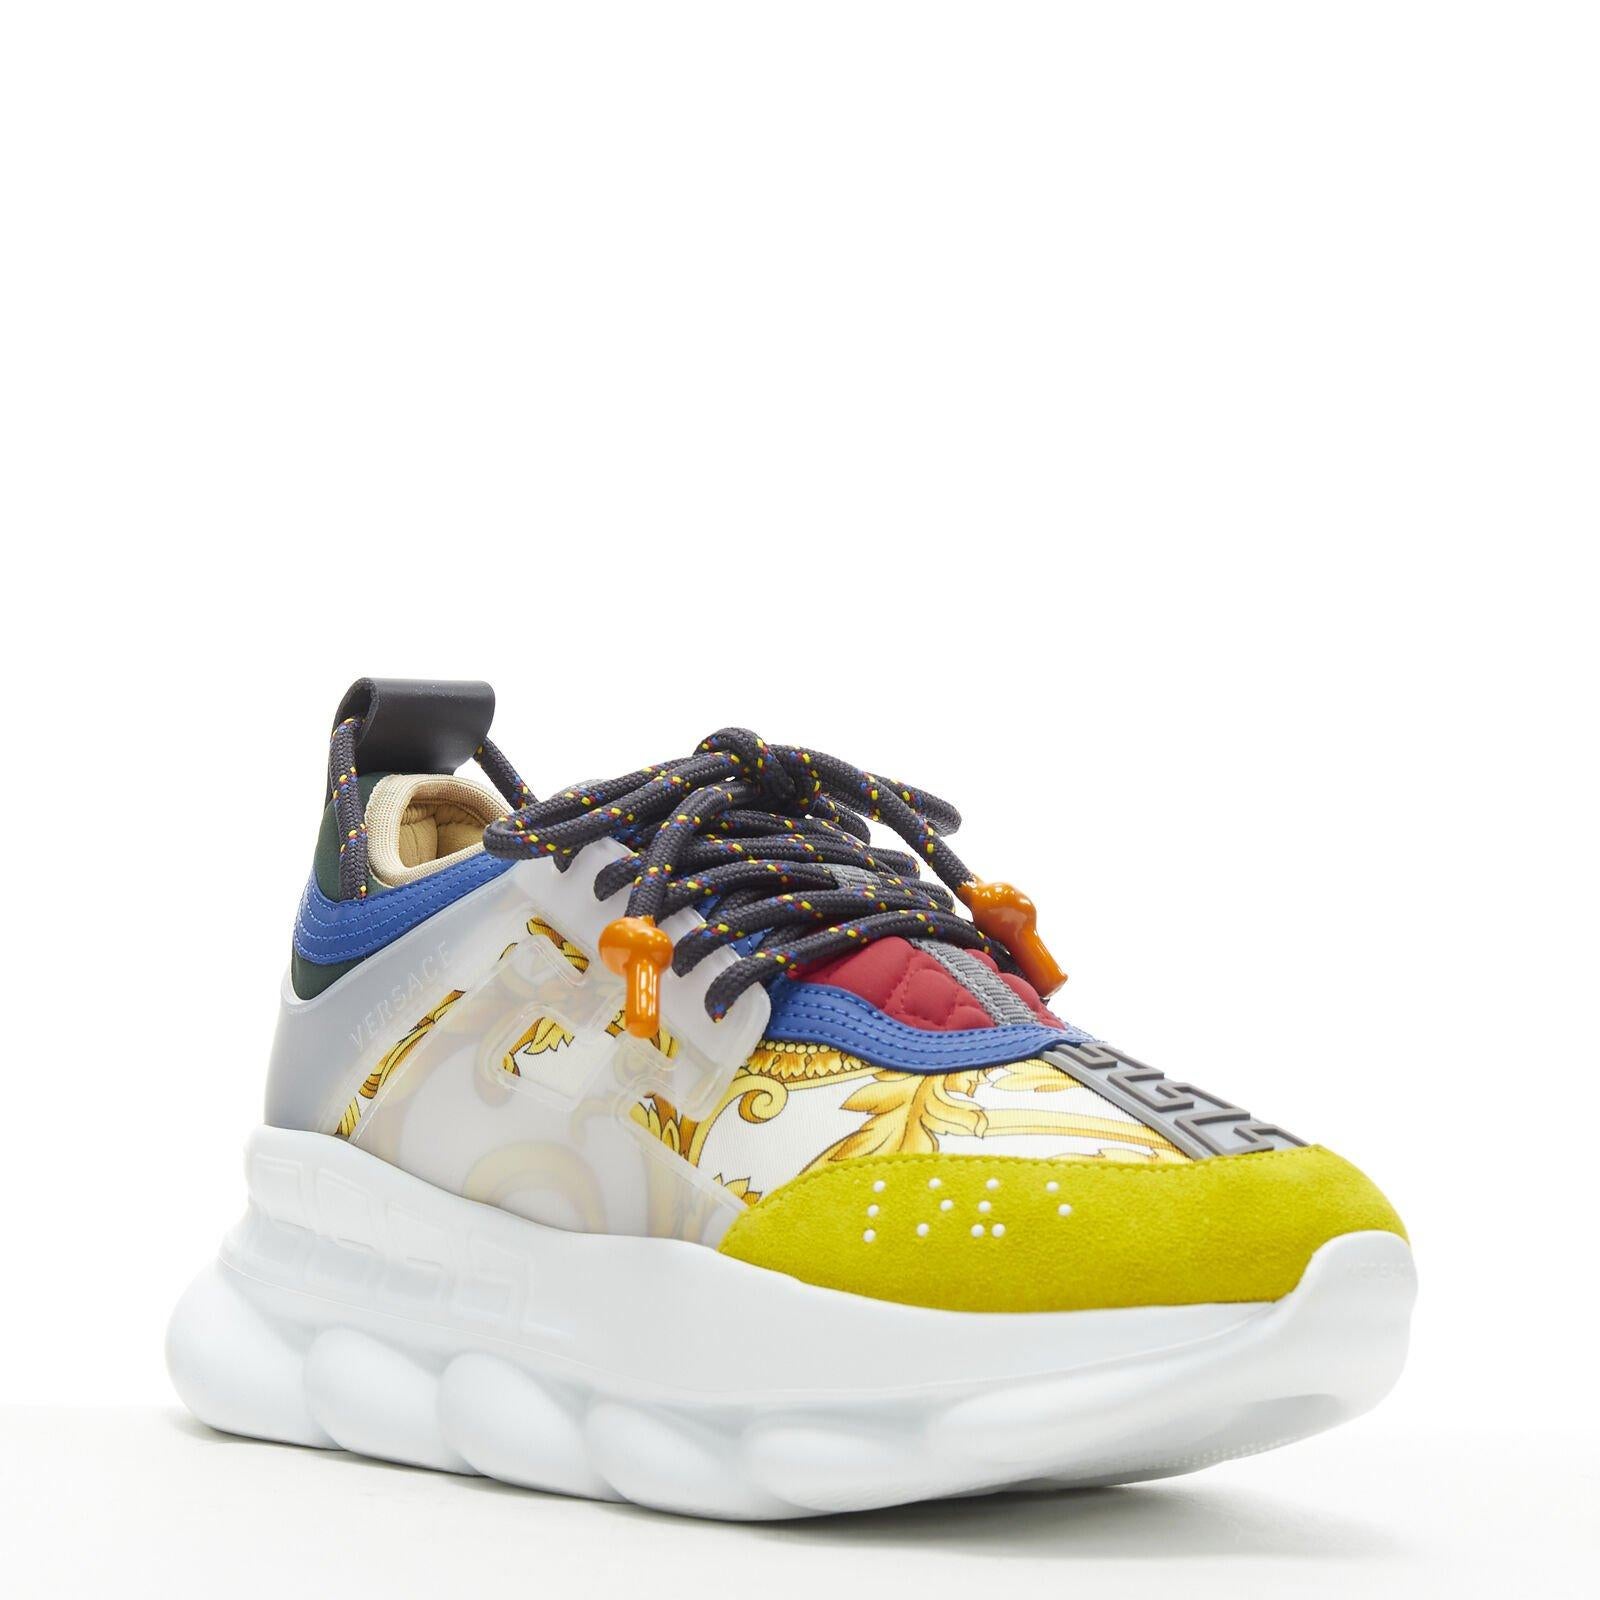 VERSACE Chain Reaction gold barocco twill yellow blue suede sneaker EU40 US7
Reference: TGAS/B00770
Brand: Versace
Designer: Salehe Bembury
Model: Versace Chain Reaction
Collection: Runway
Material: Fabric, Leather
Color: Gold
Pattern: